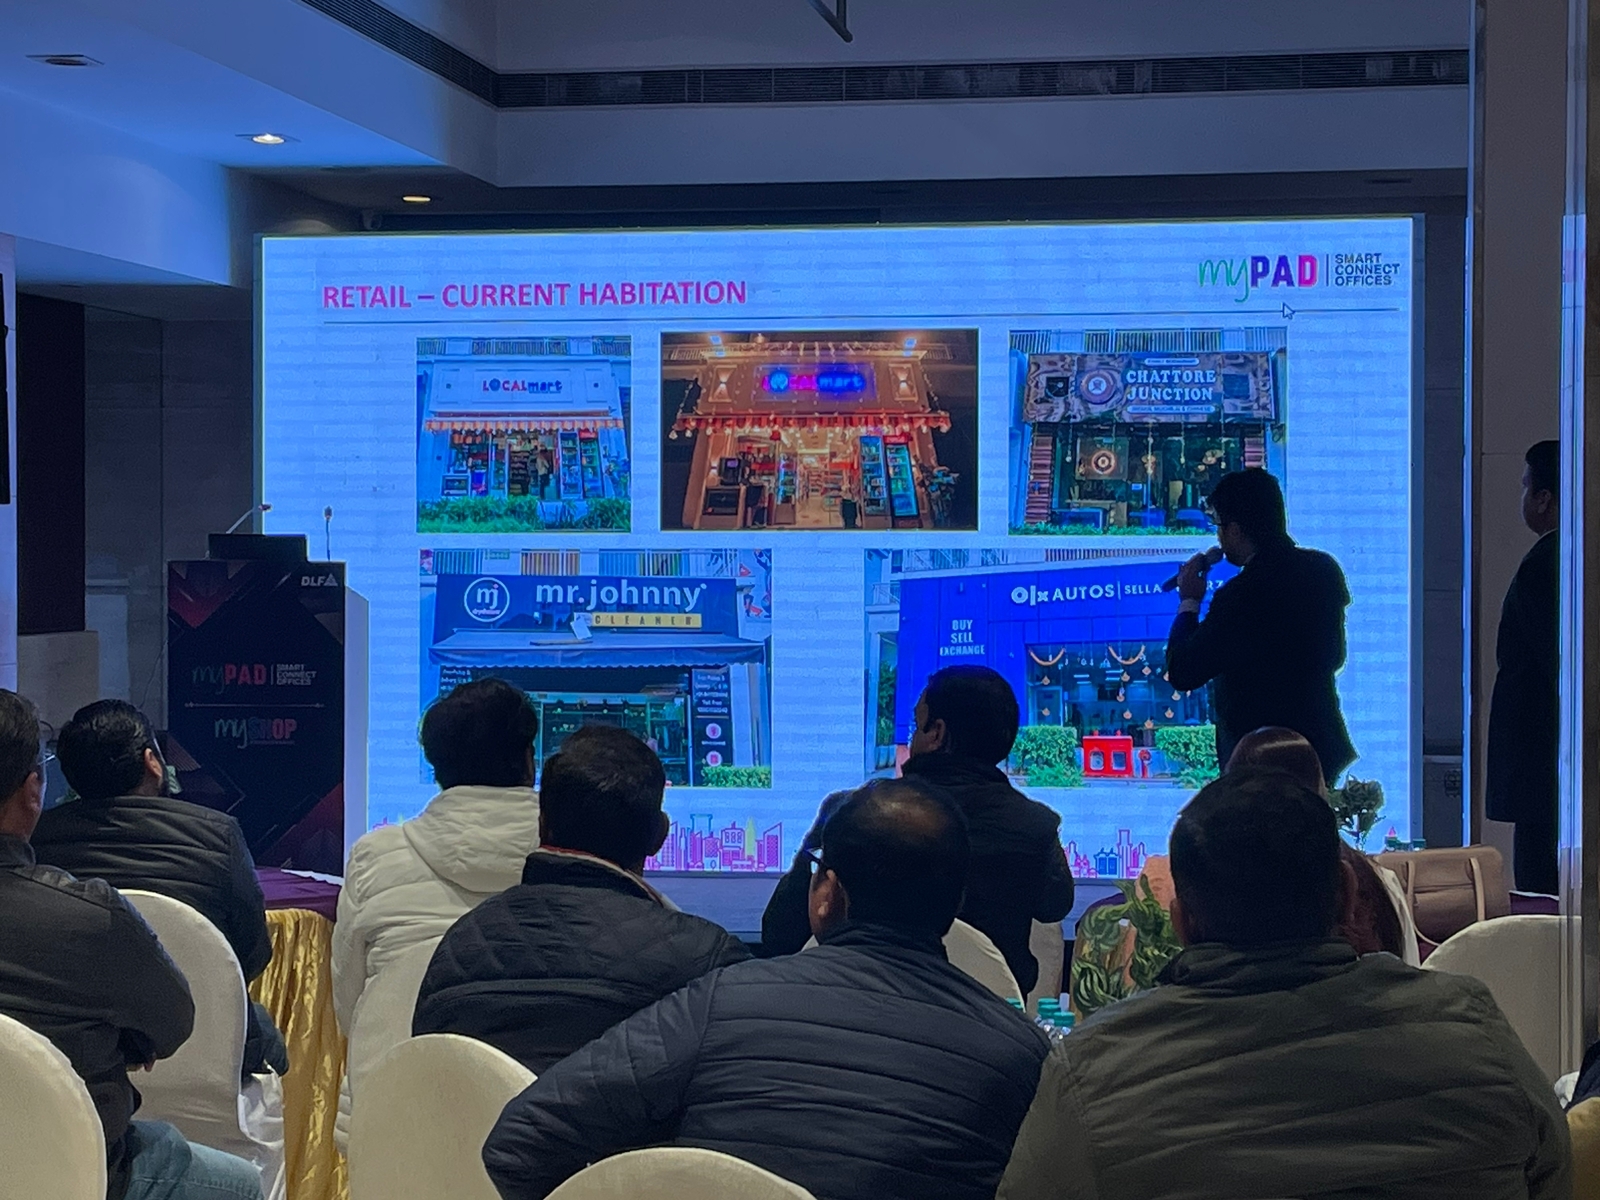 Panacea & DLF Property Show attracts 25 plus investors for DLF MYPAD Lucknow projects, Lucknow remains the hottest destination for investment.